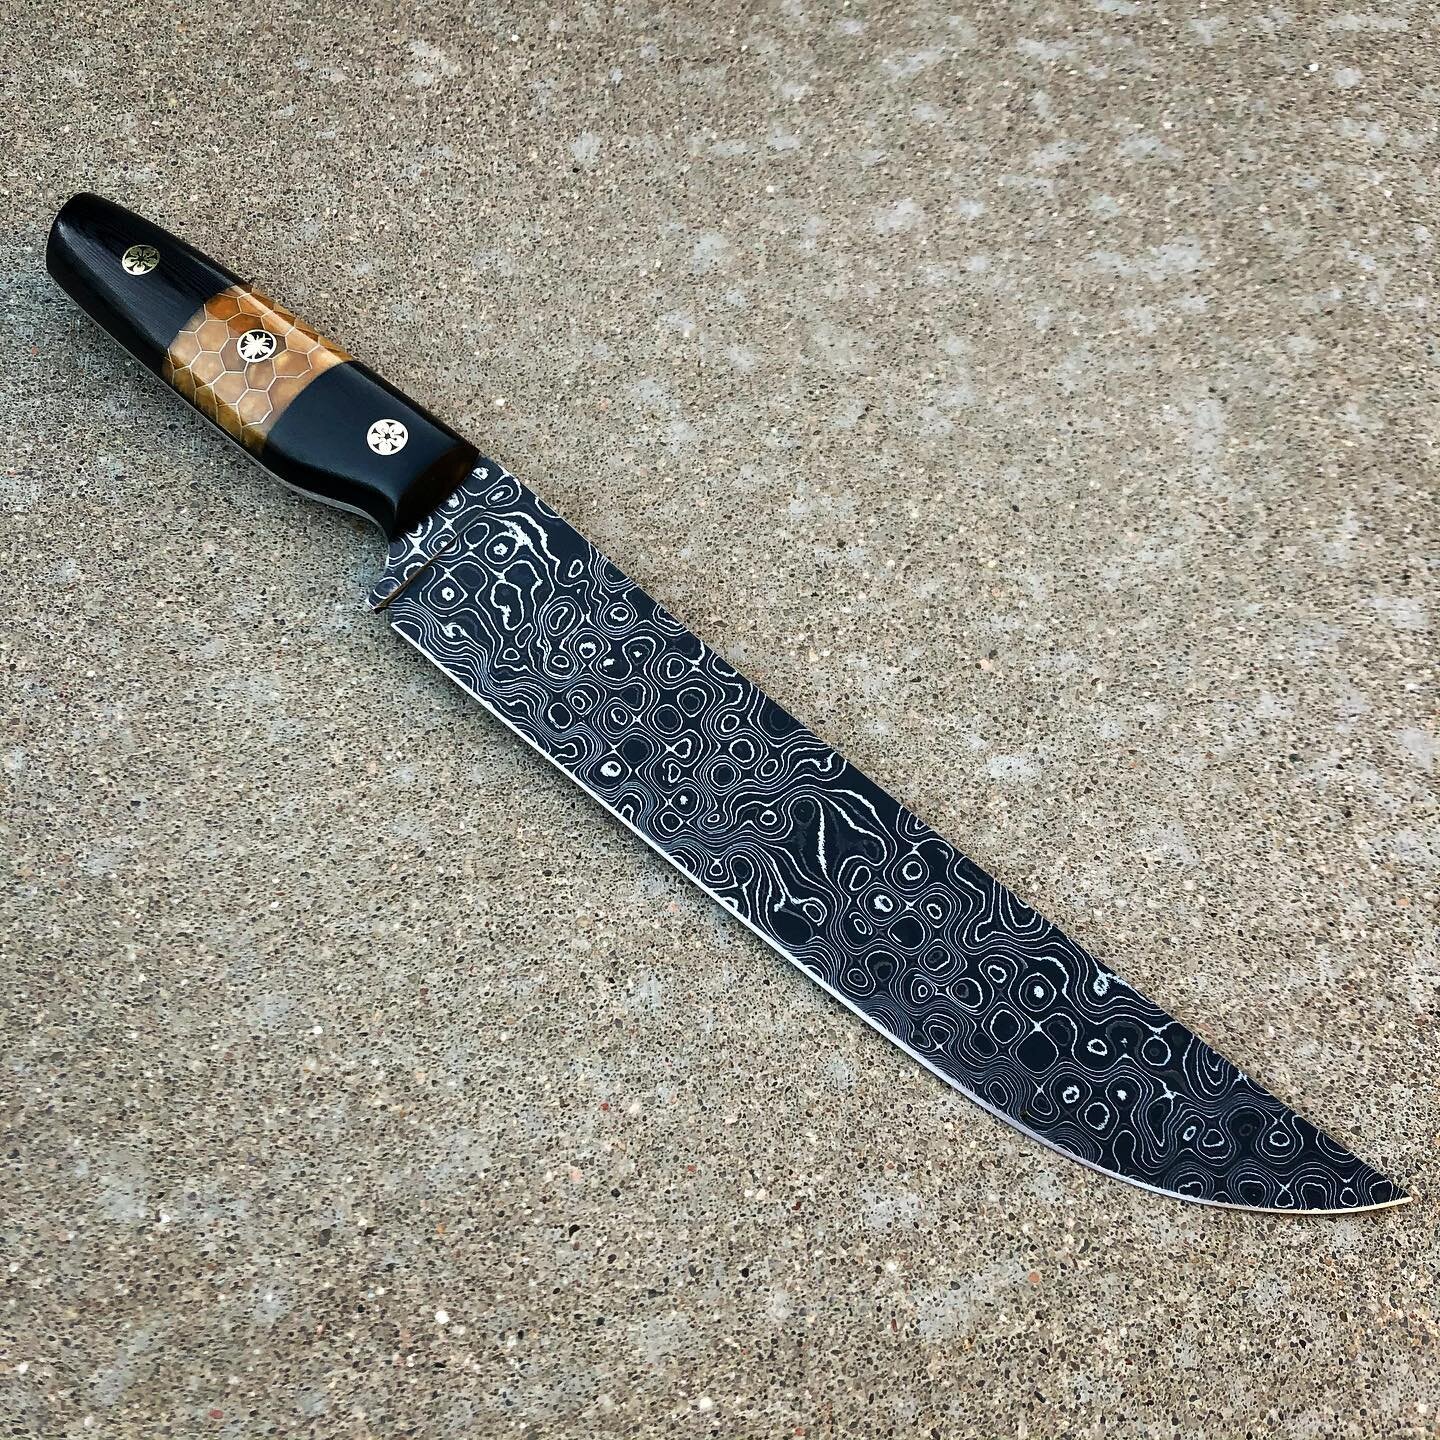 Custom order project from last year that was one of my favorites: XL Damascus blade with a gold honeycomb and G10 handle, along with custom flower and bee mosaic pins for an extra touch of detail.